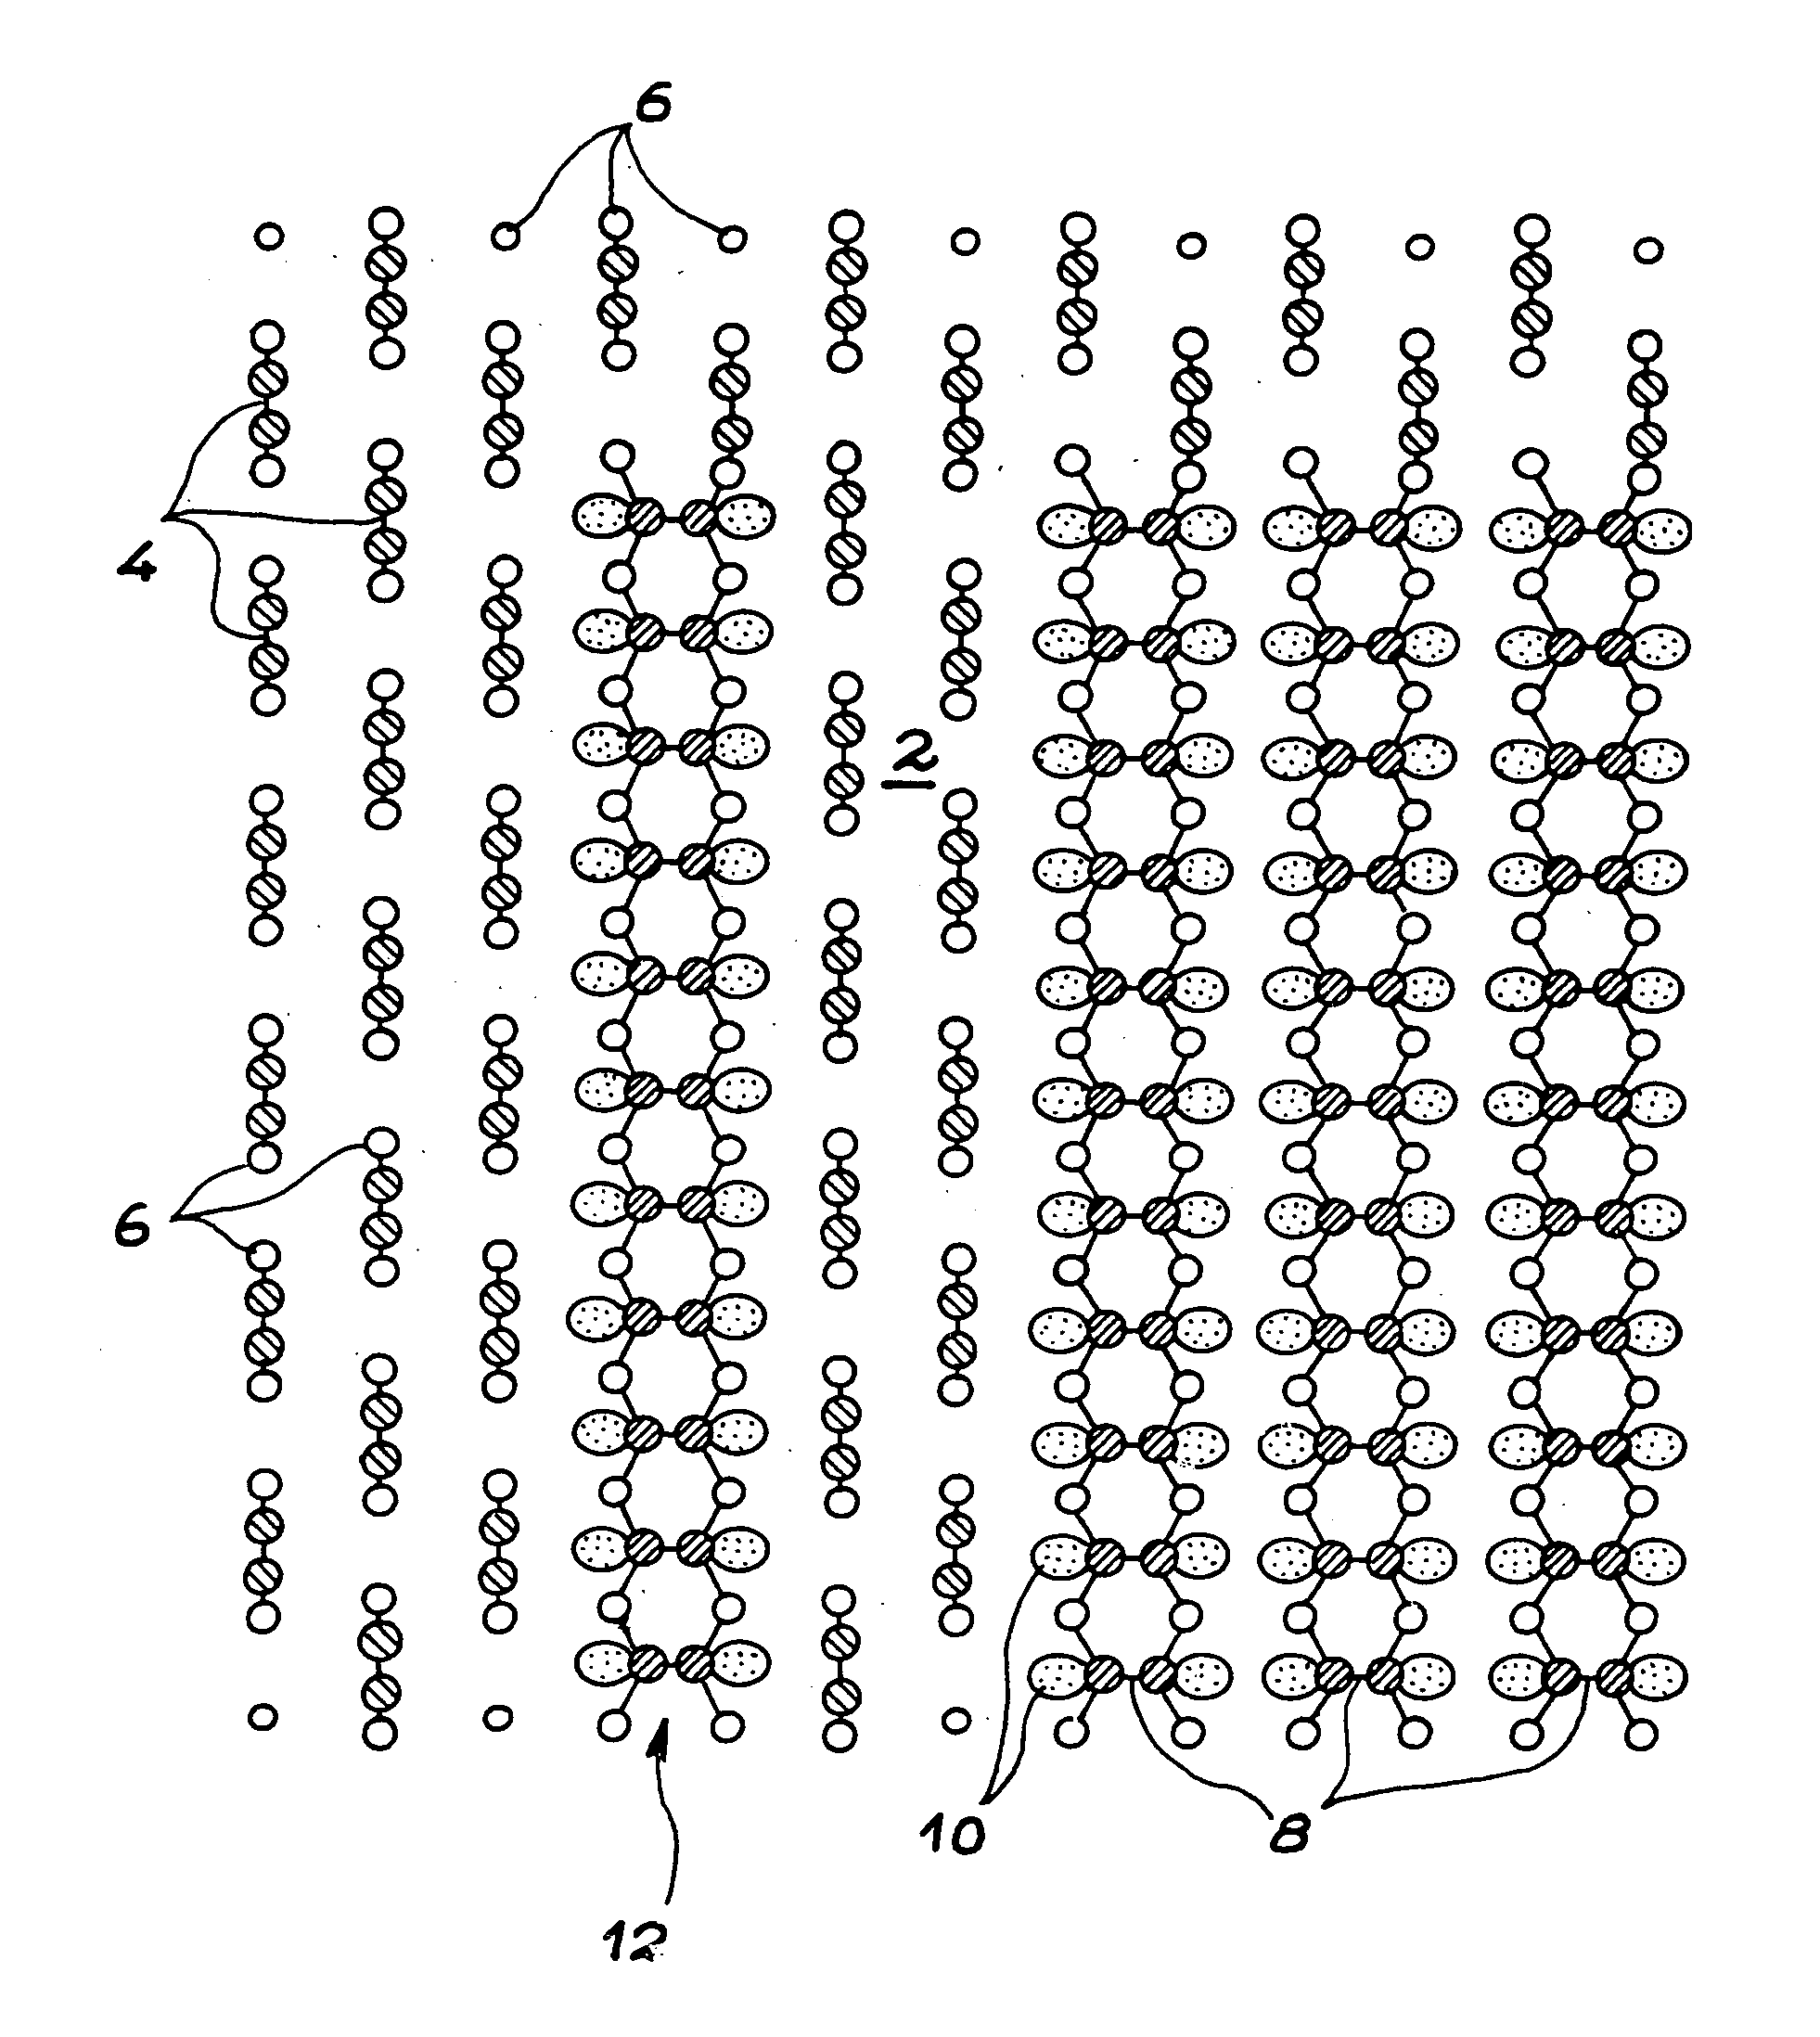 Monoatomic and moncrystalline layer of large size, in diamond type carbon, and method for the manufacture of this layer